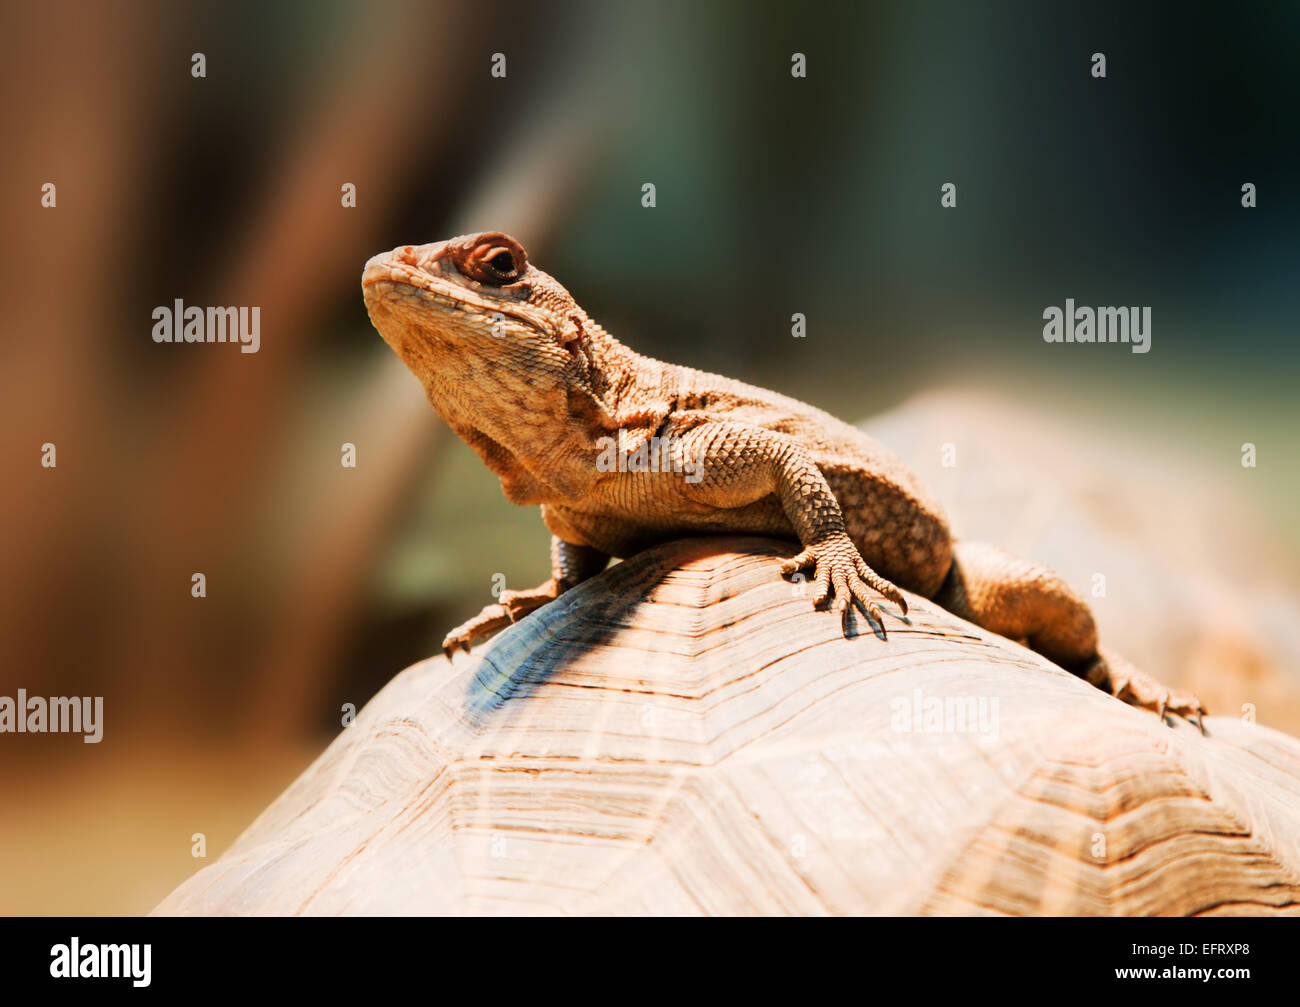 A lizard sitting on the turtle carapace Stock Photo